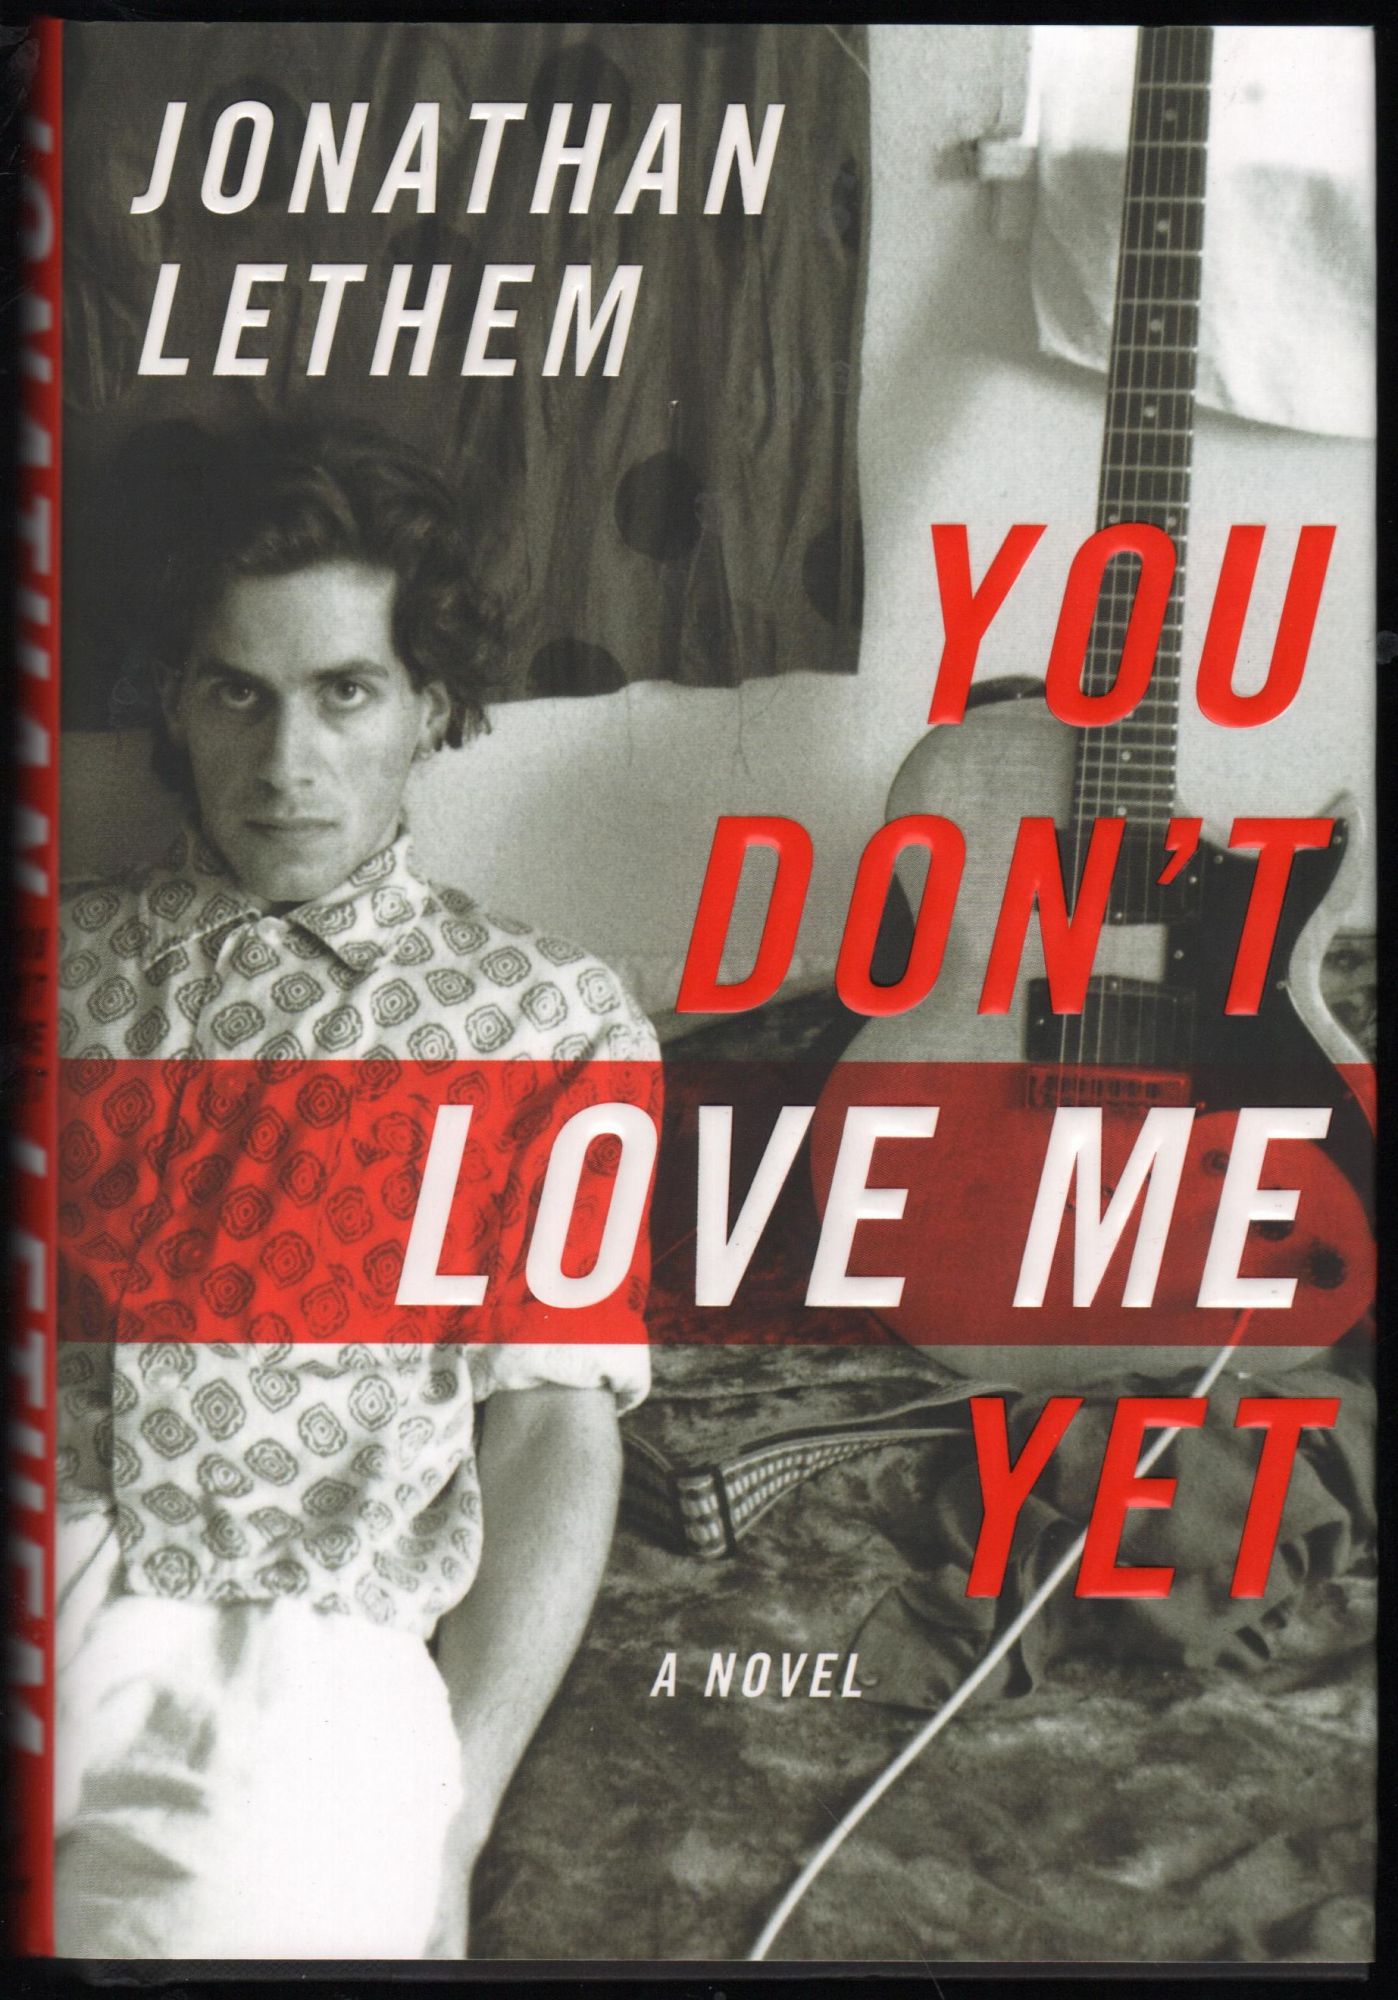 Jonathan Lethem: You Don't Love Me Yet (Hardcover, 2007, Doubleday)